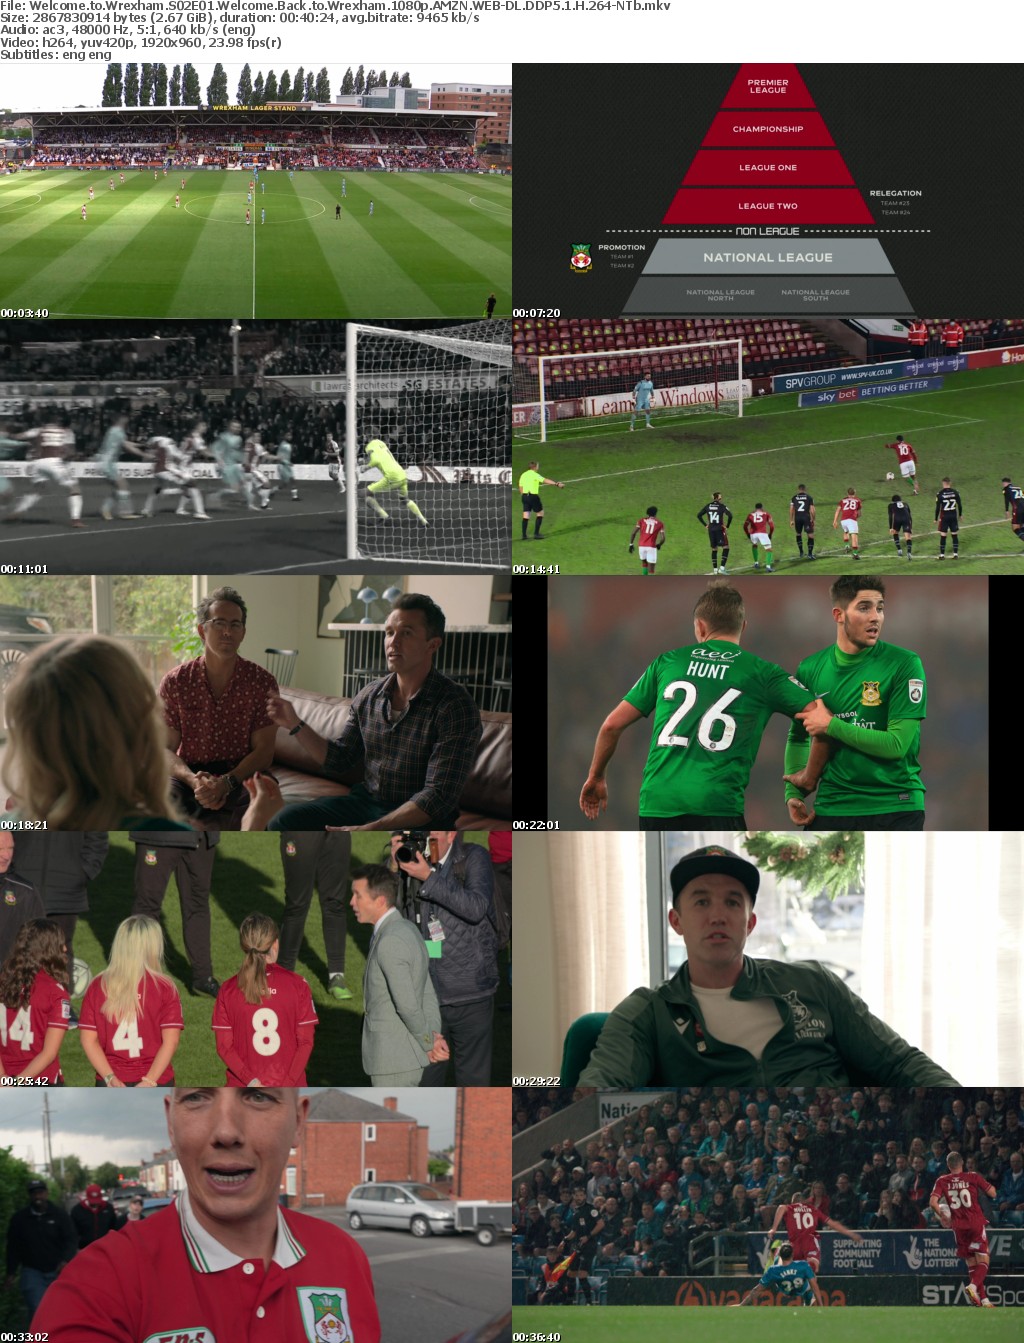 Welcome to Wrexham S02E01 Welcome Back to Wrexham 1080p AMZN WEB-DL DDP5 1 H 264-NTb